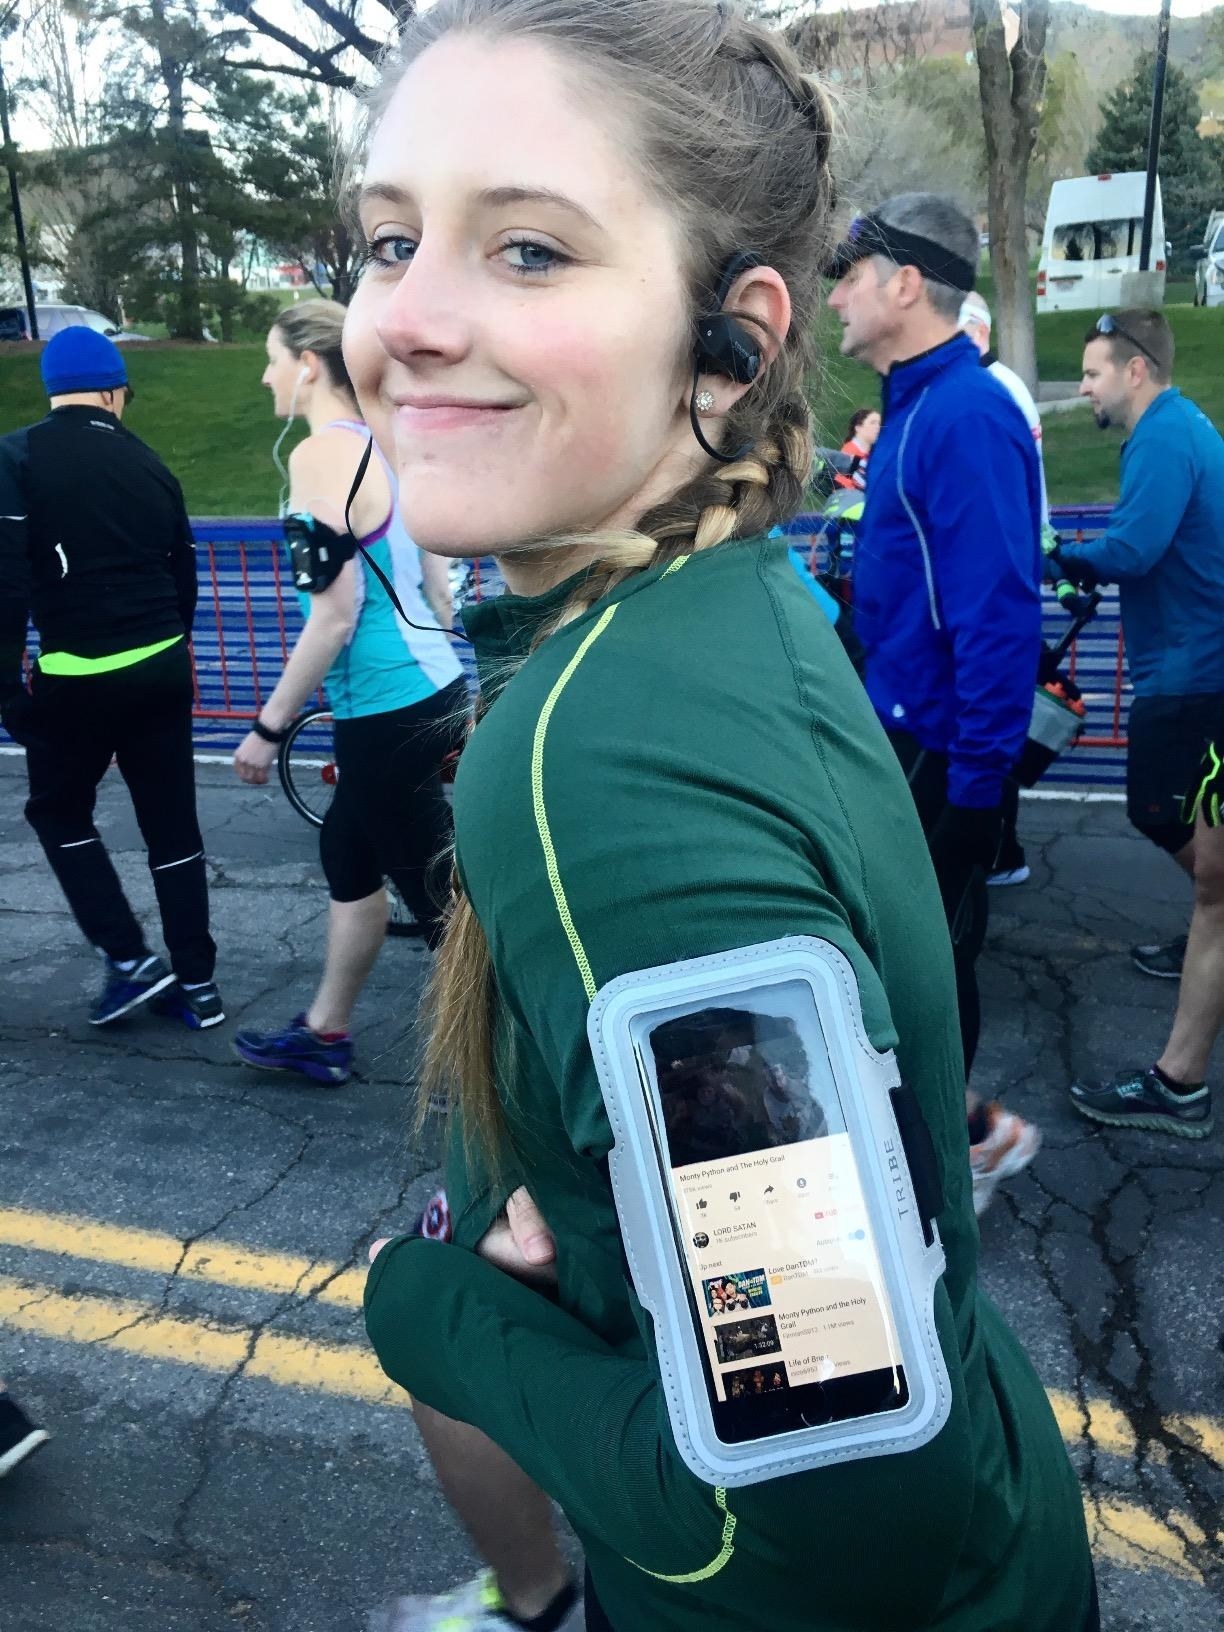 reviewer wears light blue armband with phone inside during half marathon